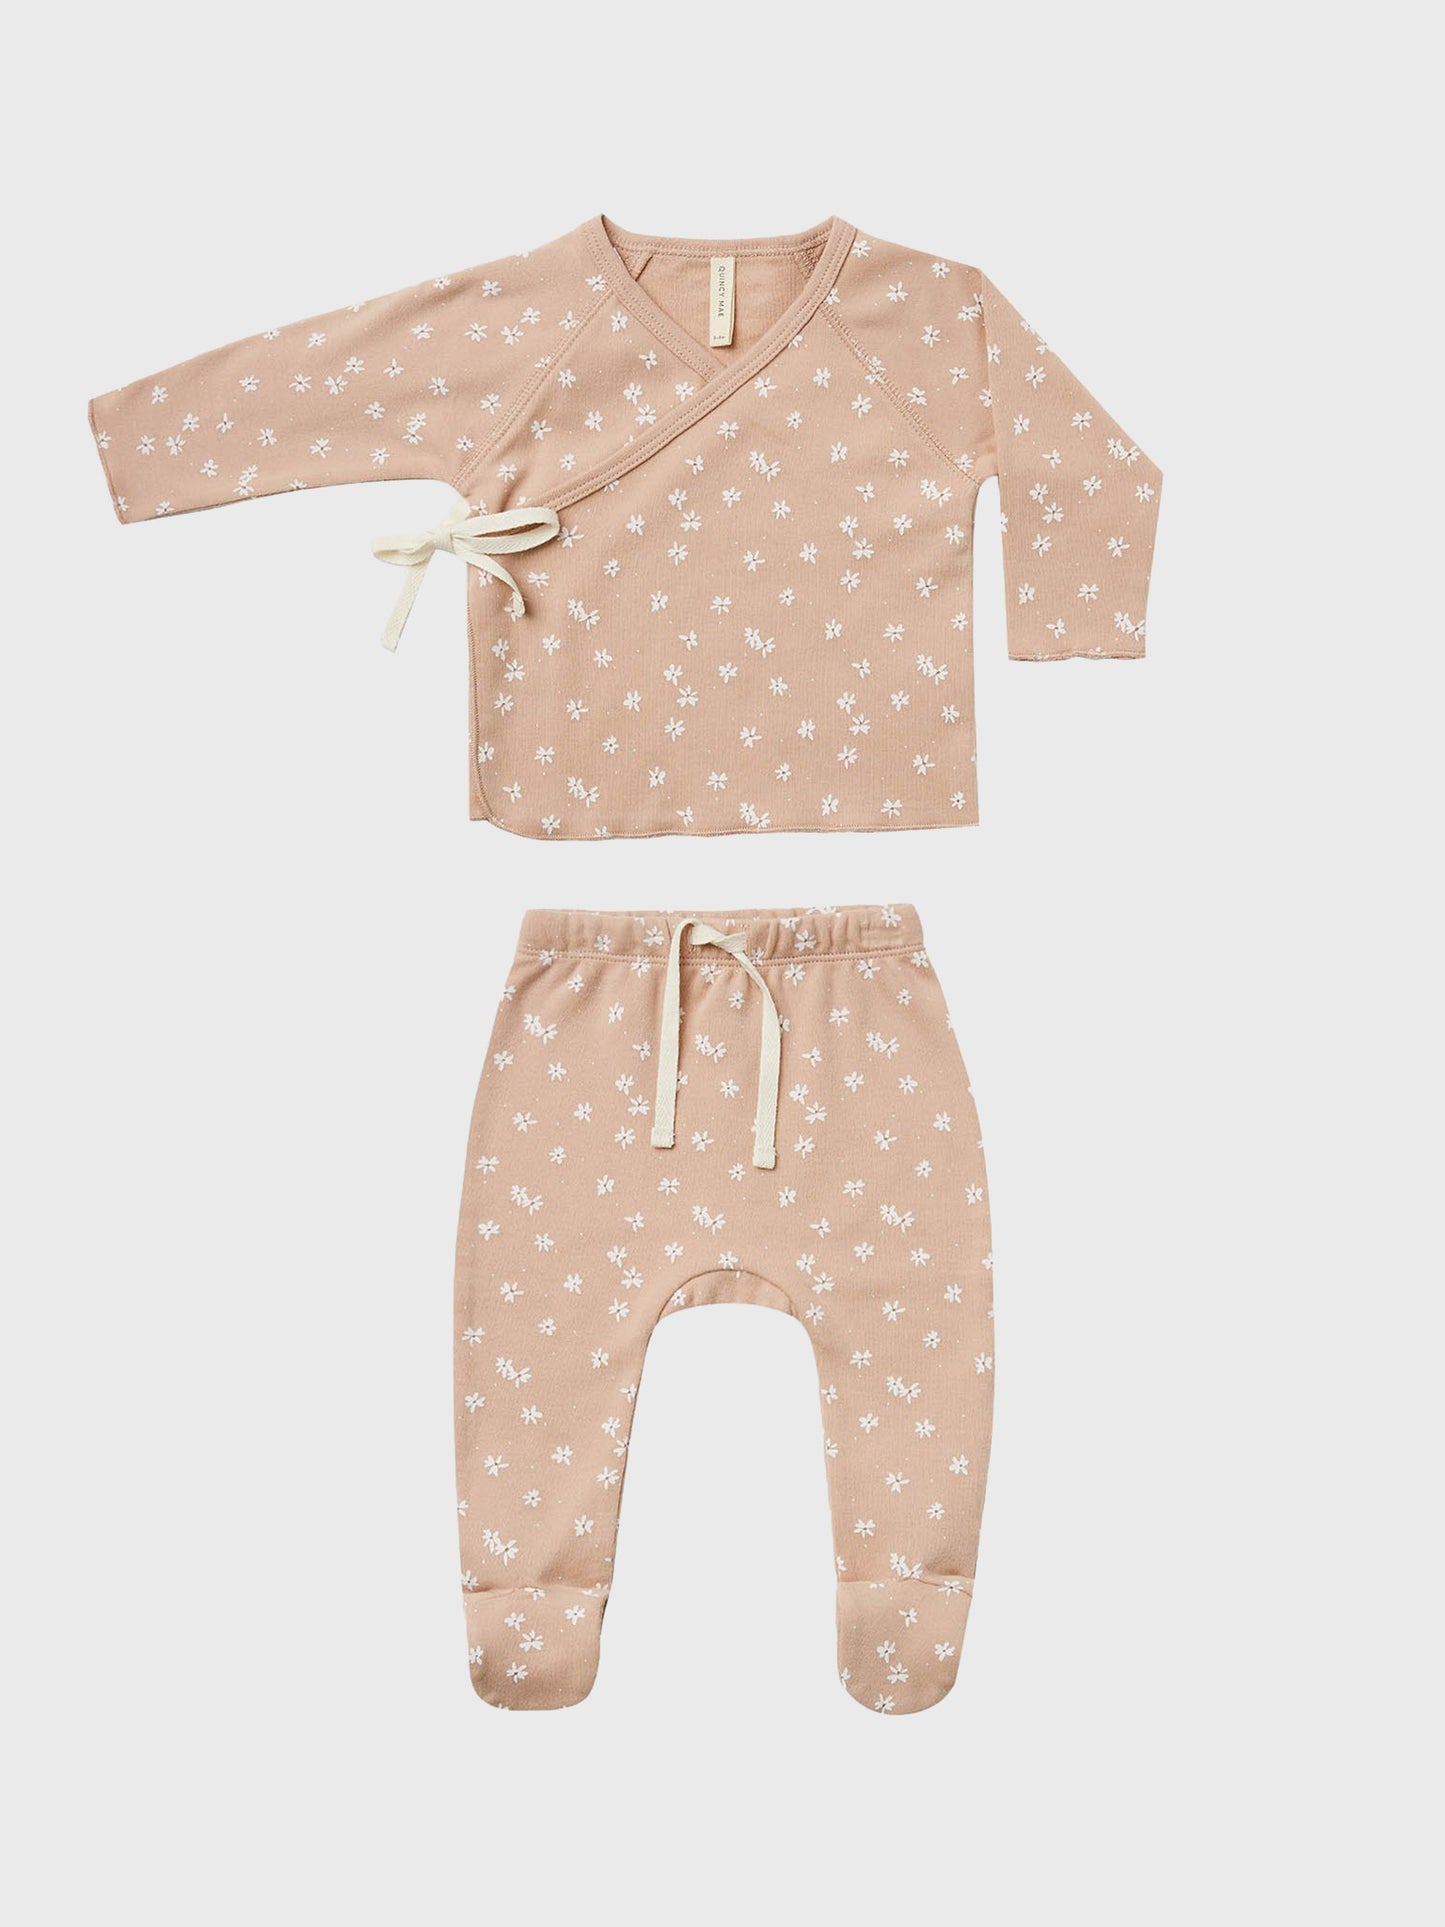 Quincy Mae Little Girls' Kimono Top + Footed Pant Set